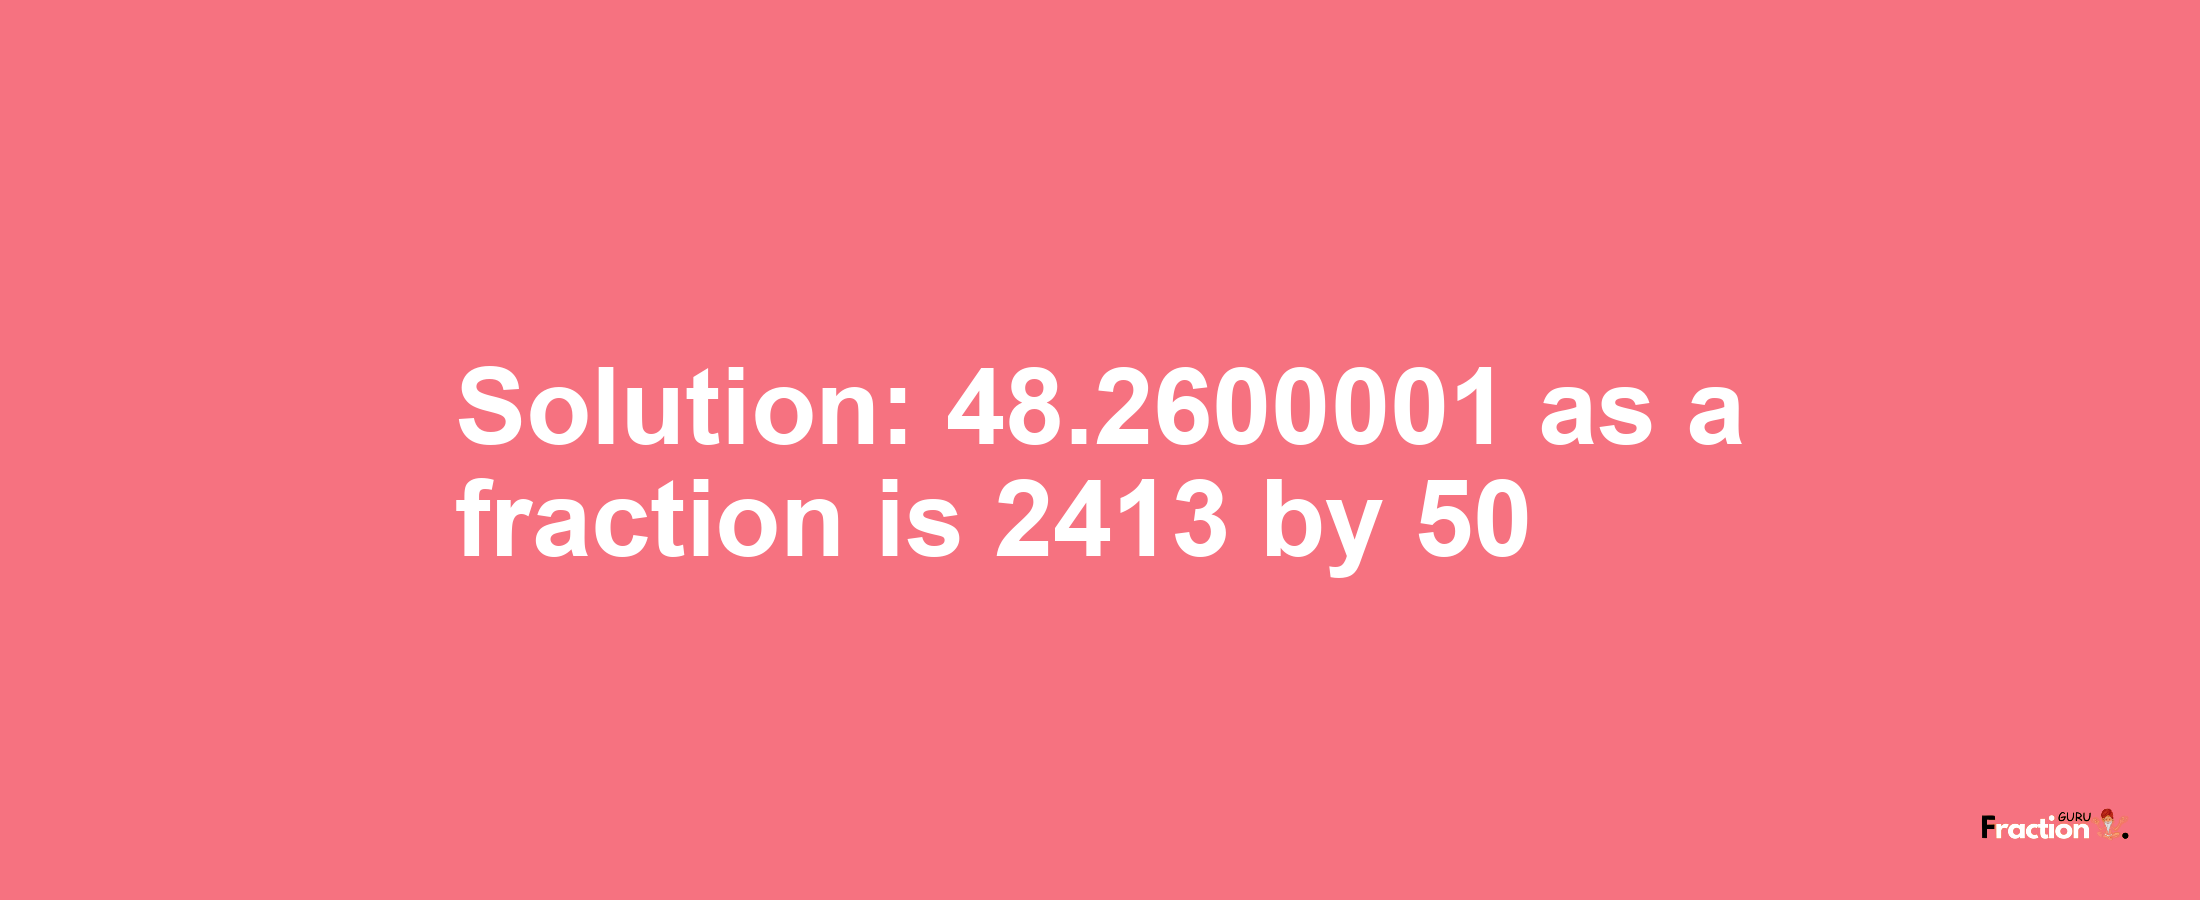 Solution:48.2600001 as a fraction is 2413/50